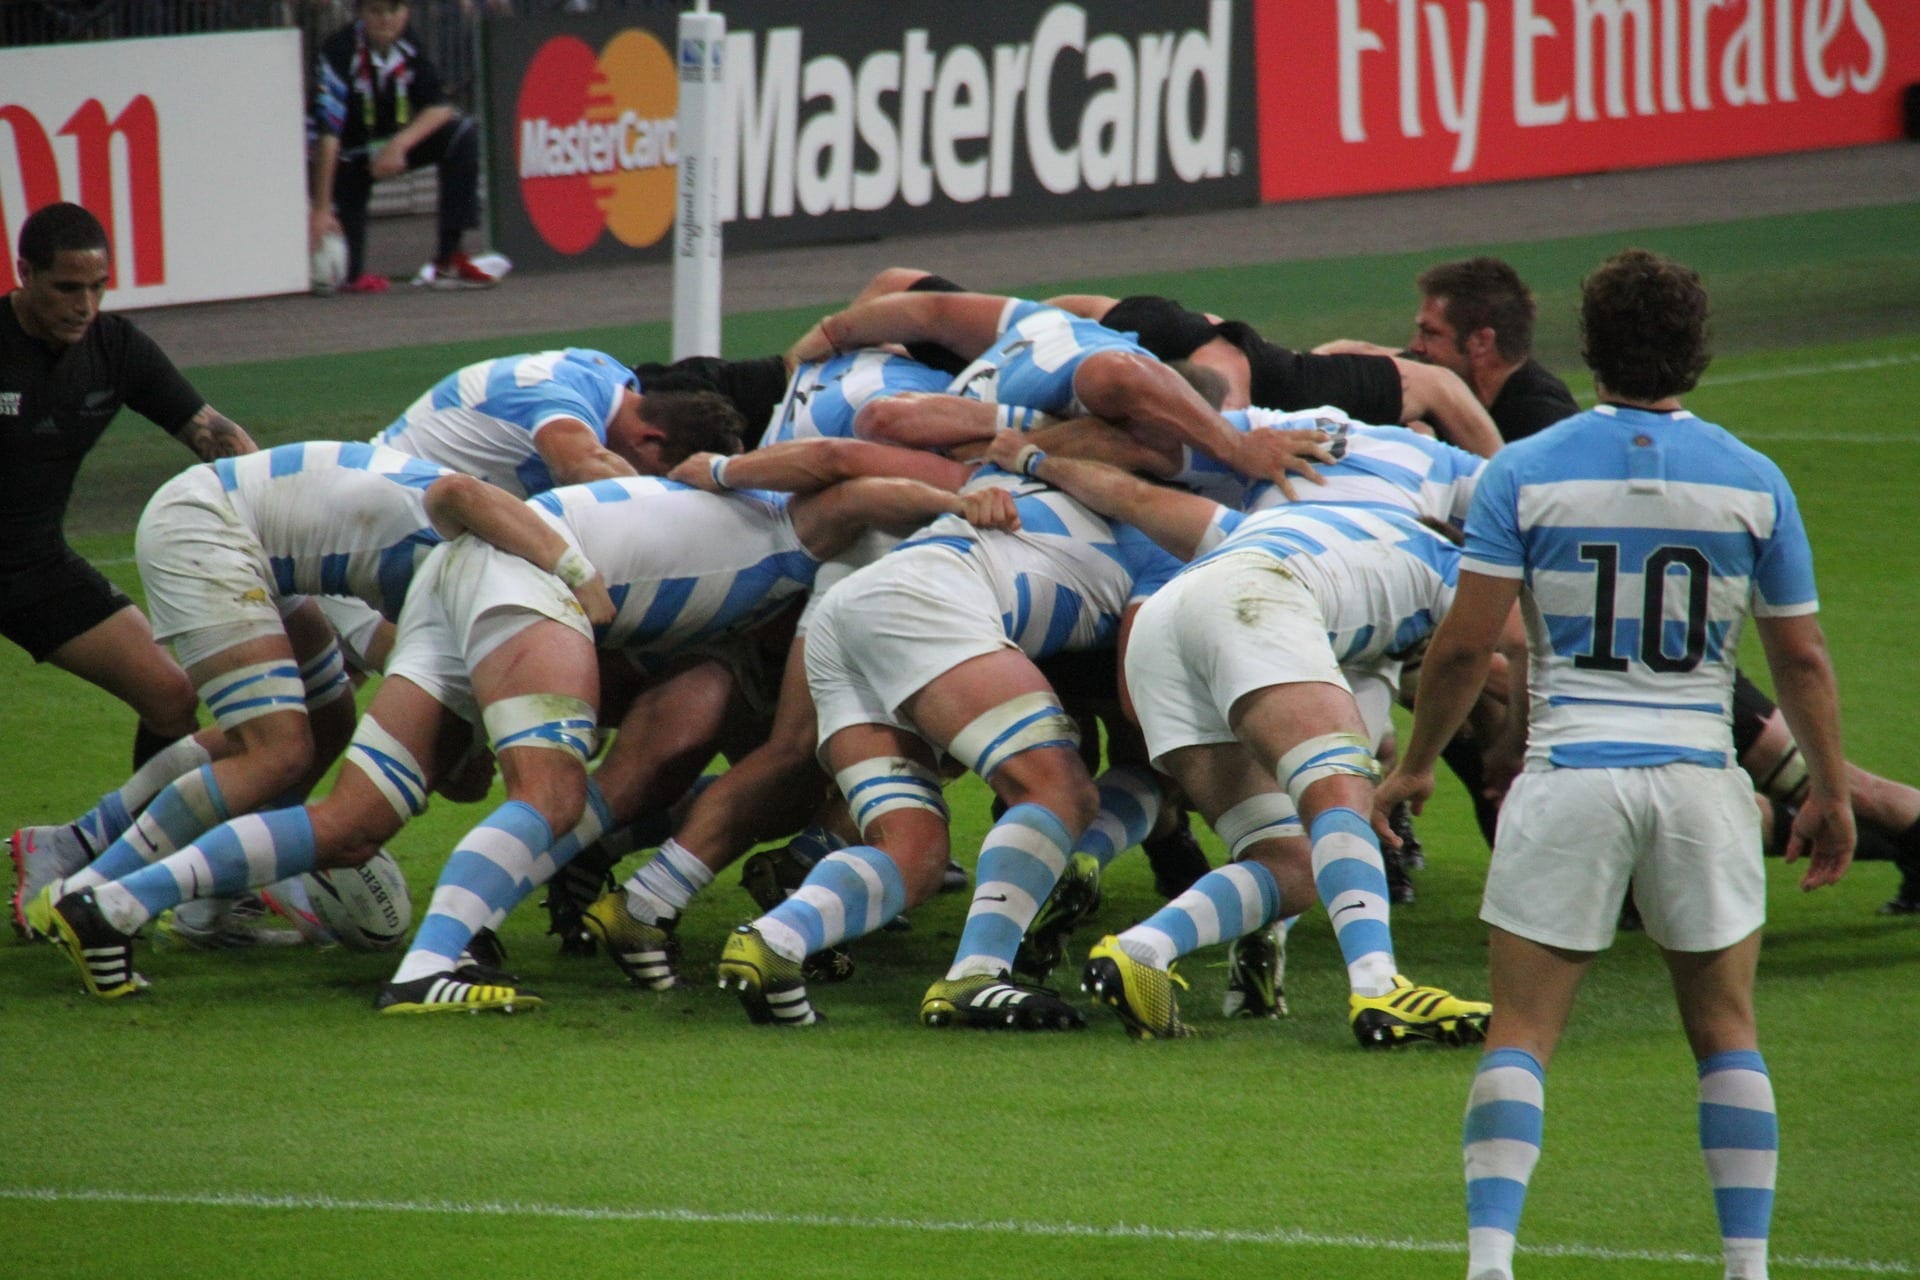 Players playing a rugby match